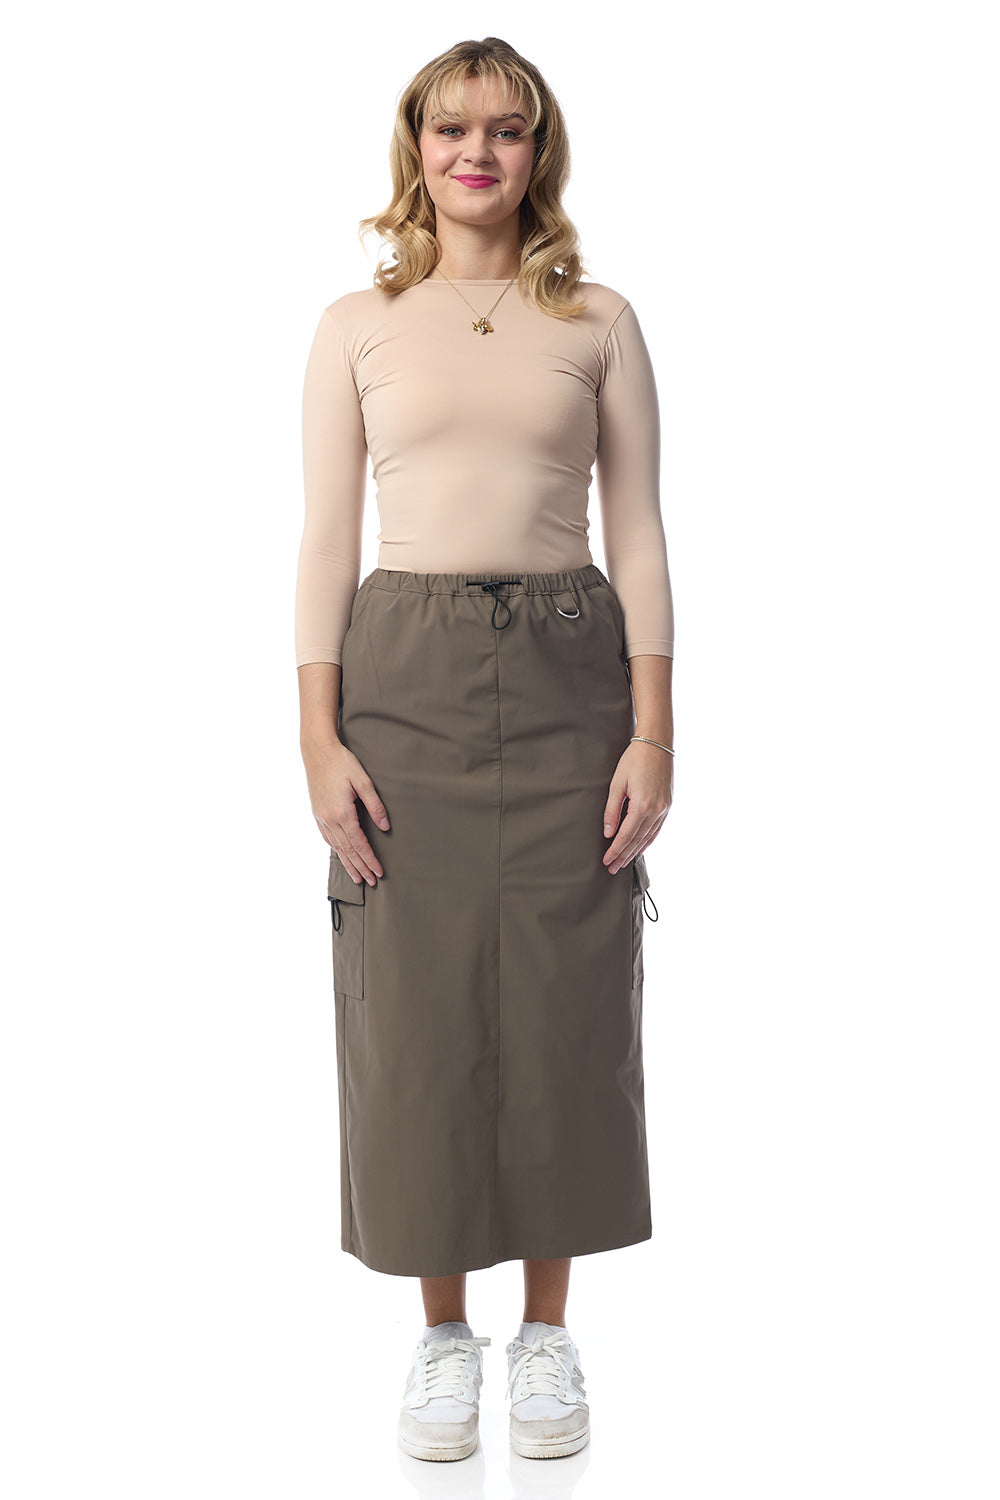 woman wearing fatigue khaki army green colored cargo skirt with pockets 